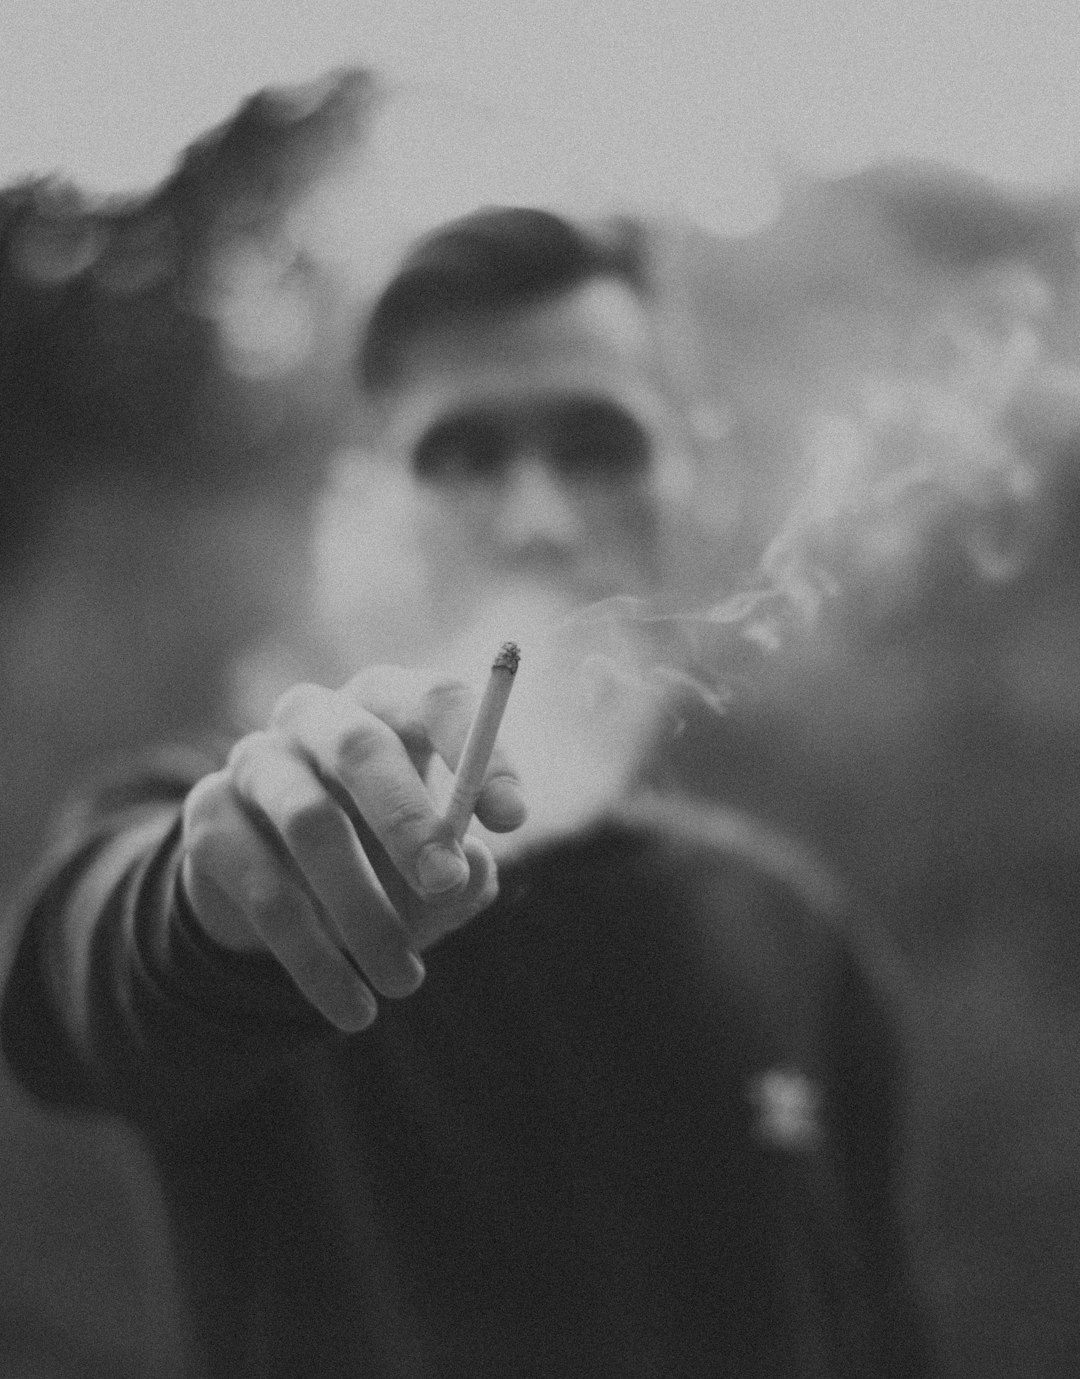 grayscale and selective focus photography of man holding single cigarette stick